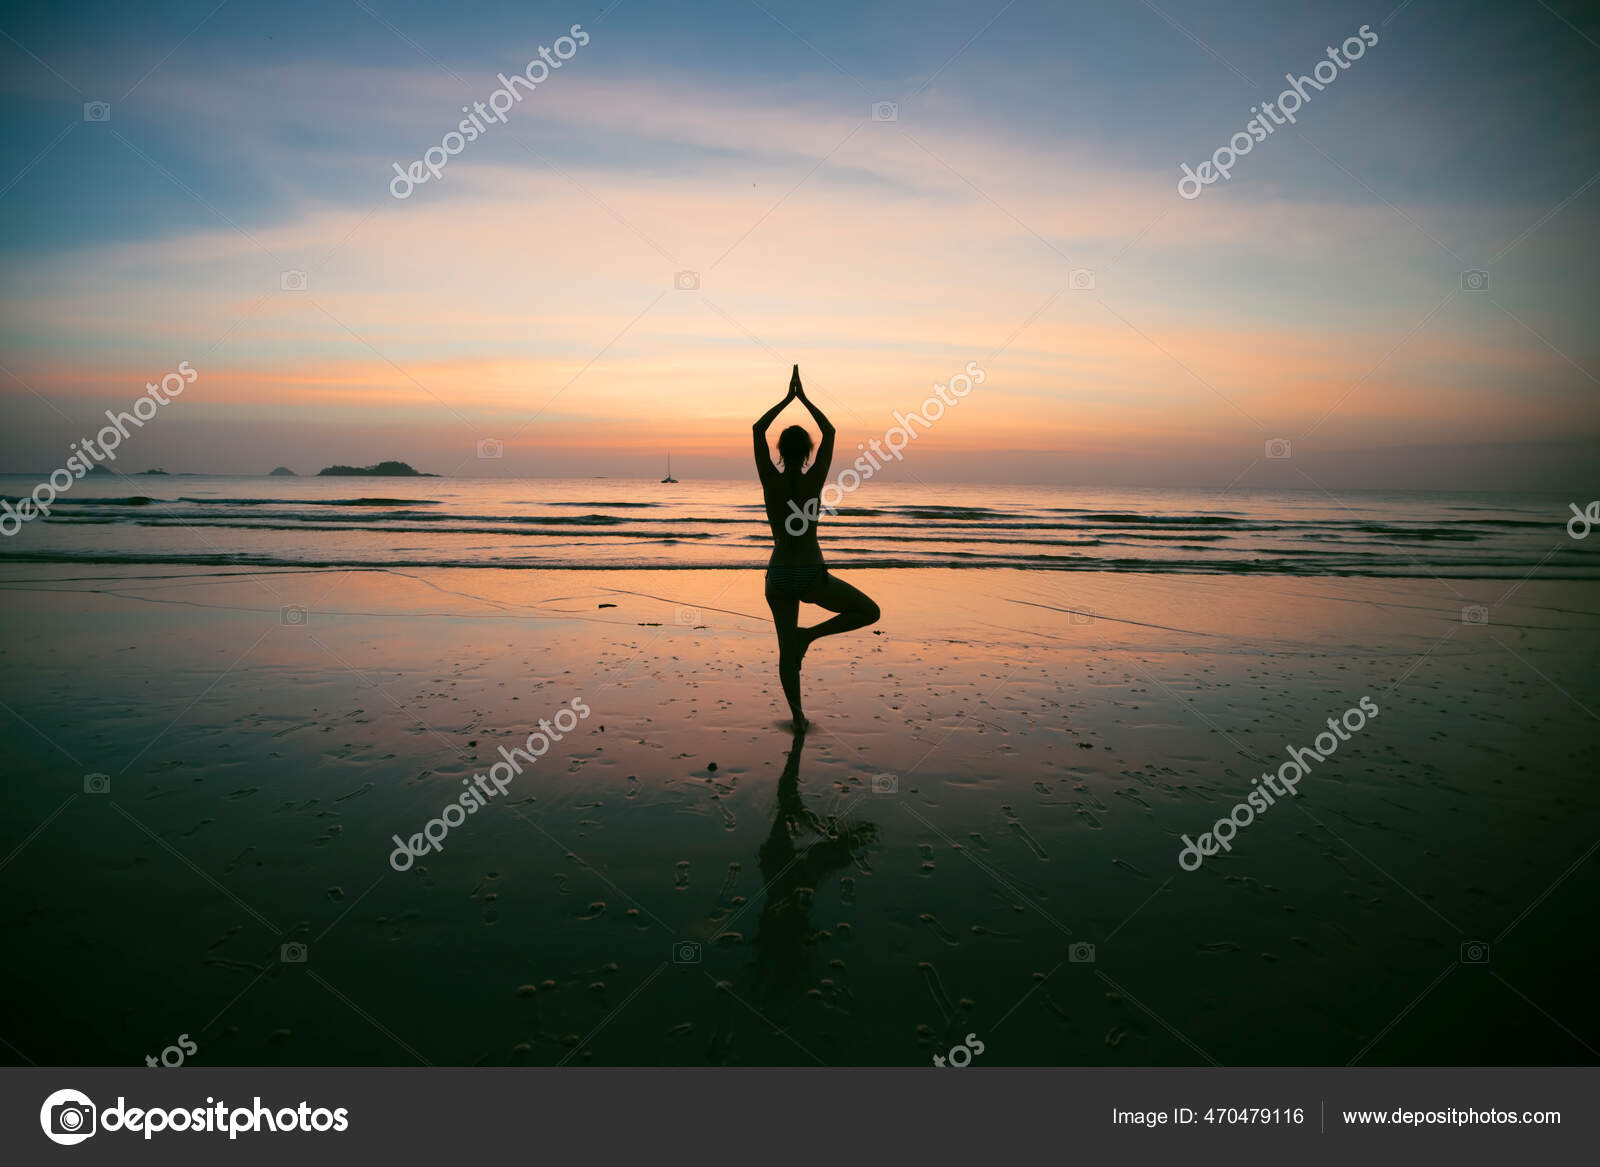 Silhouette Of Woman Standing At Yoga Pose On The Beach During An